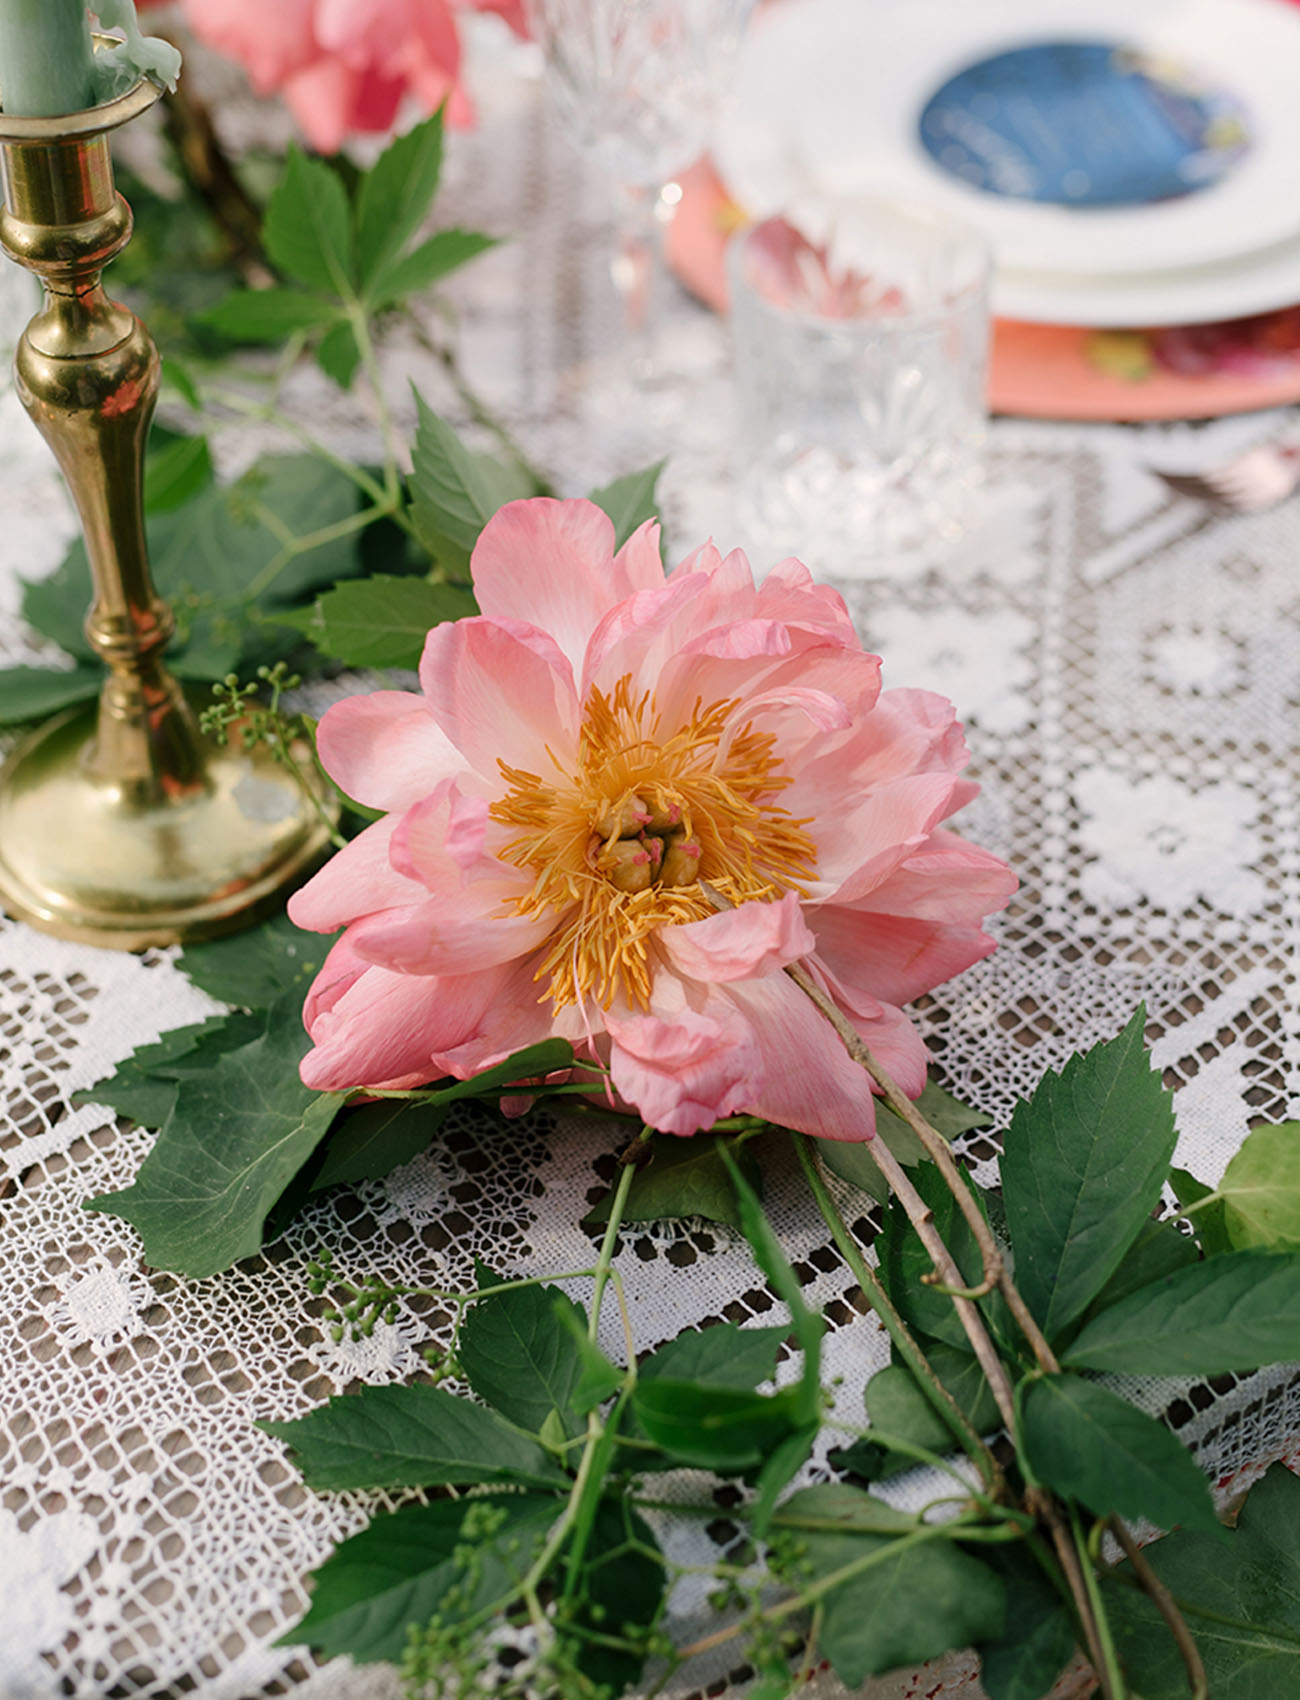 The table was decorated in pastels and with peonies